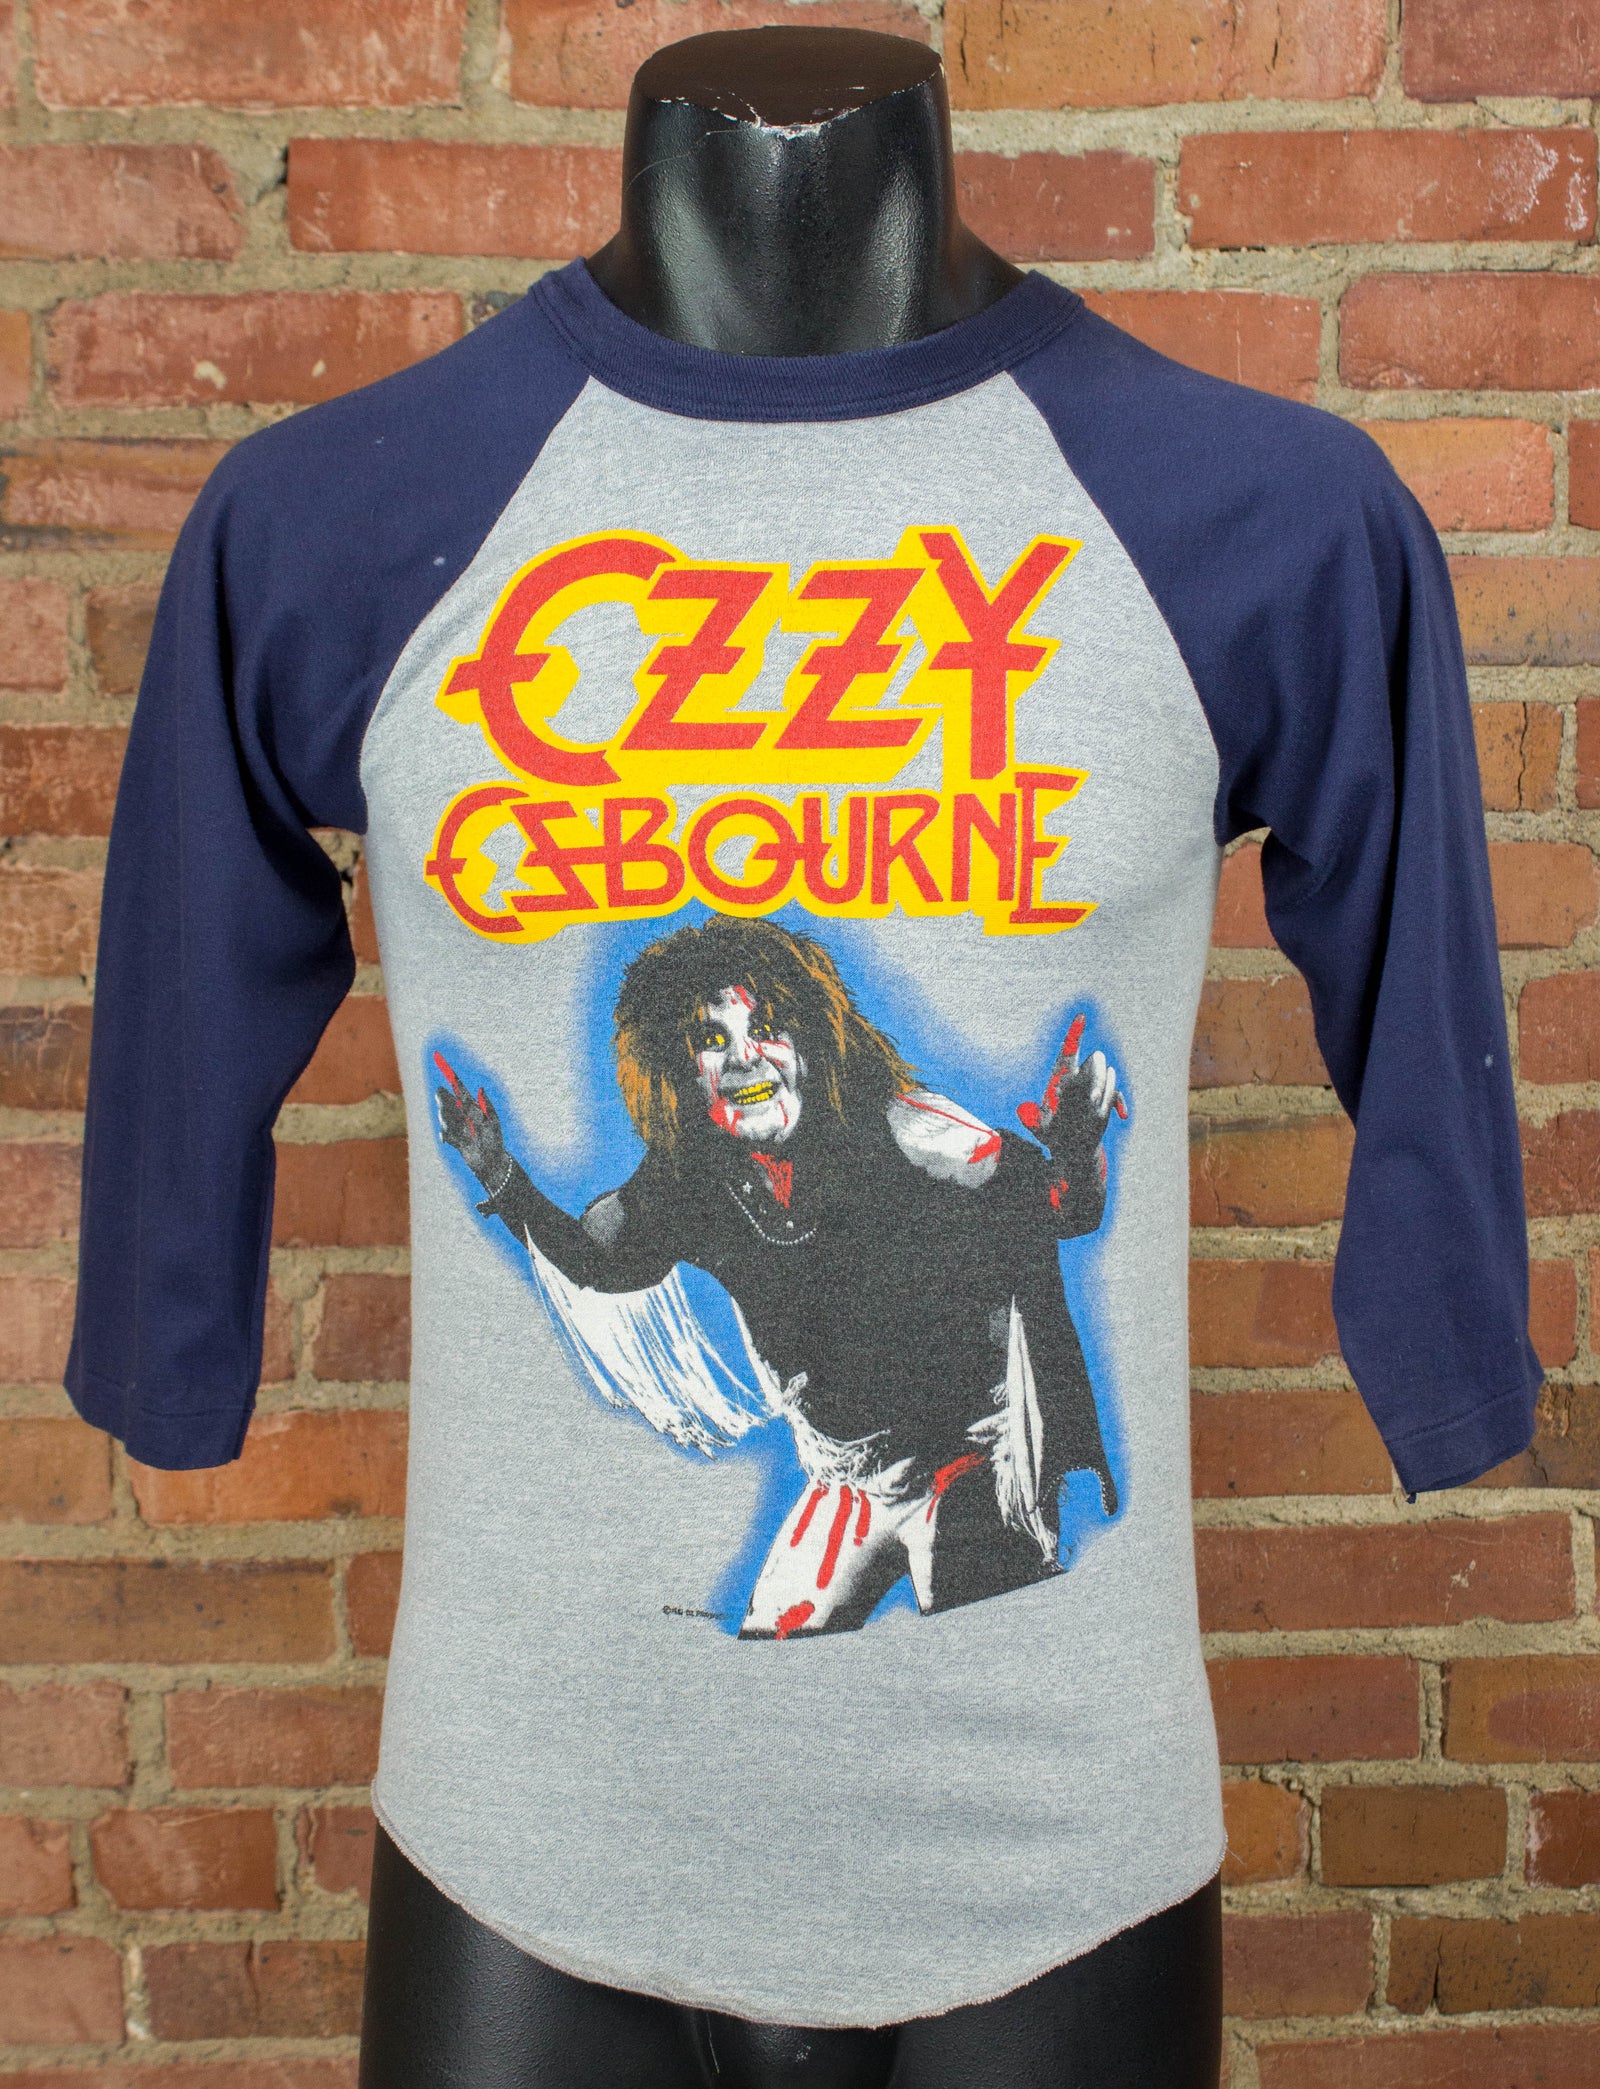 Vintage Ozzy Osbourne Concert T Shirt 1982 Diary of a Madman Grey and Navy Blue Raglan Jersey Small